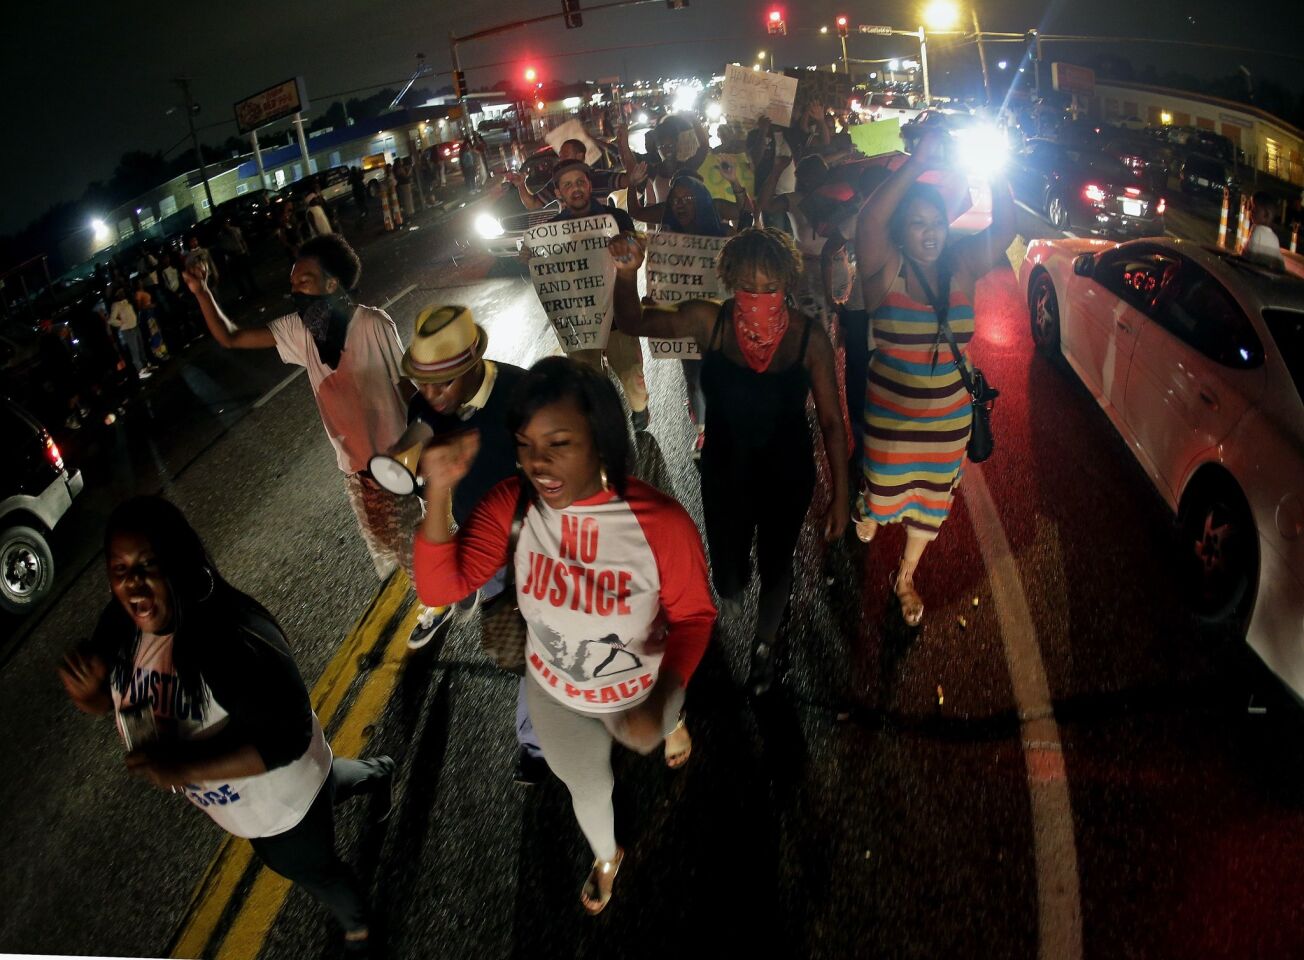 Protesters march on Aug. 15 down the middle of a street in front of a convenience store that was looted and burned after the shooting death of Michael Brown by police in Ferguson, Mo.